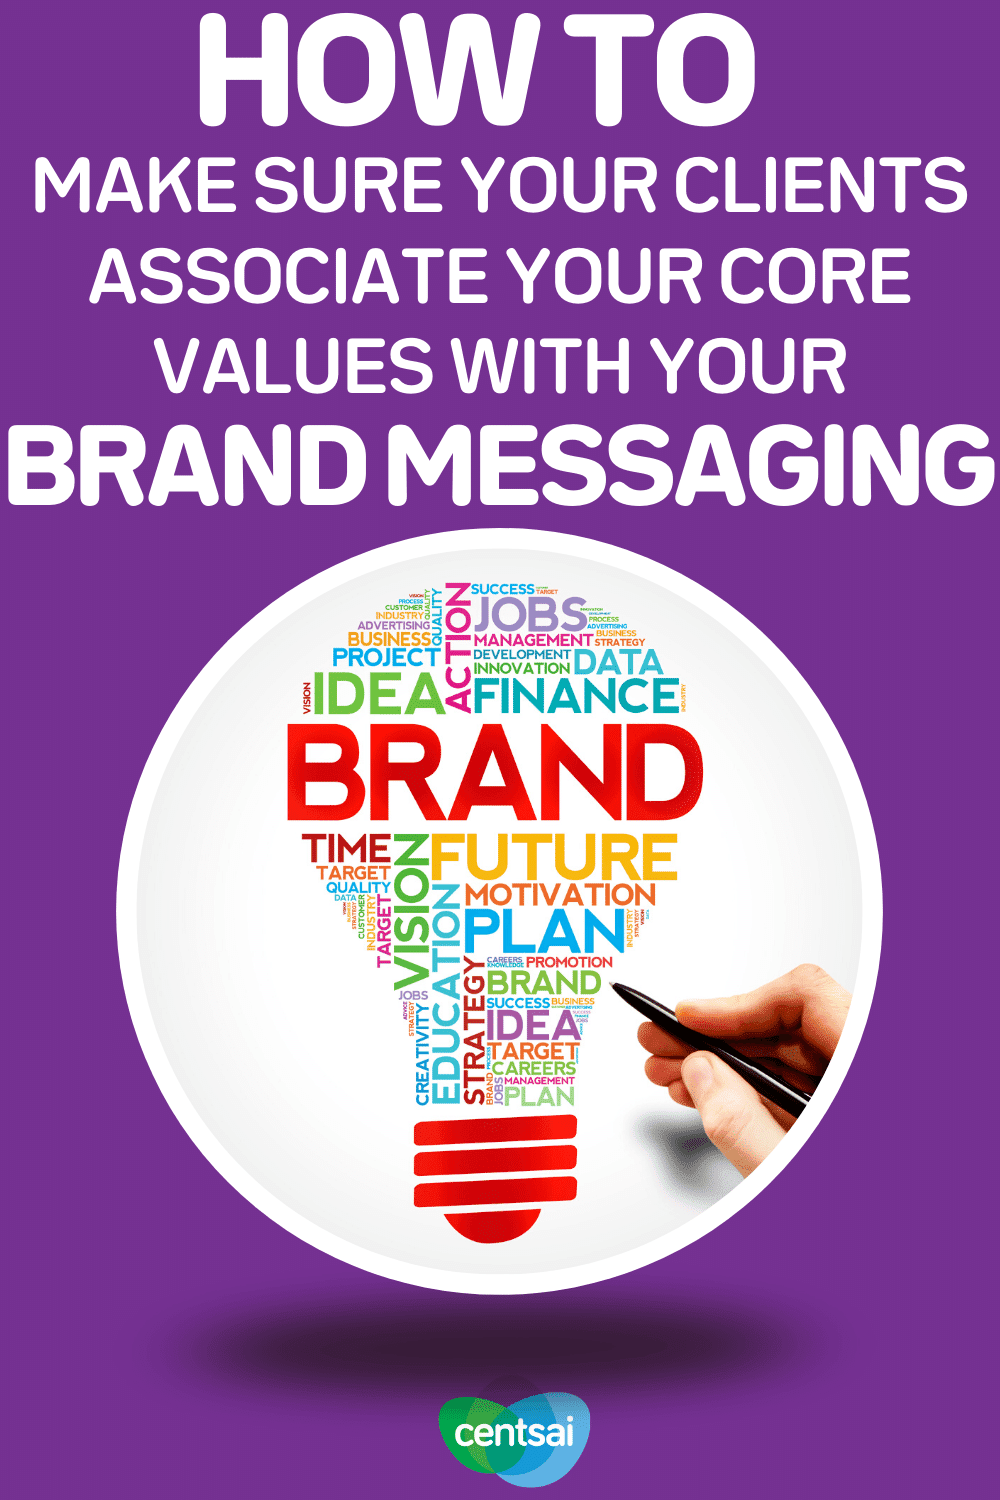 How to Make Sure Your Clients Associate Your Core Values With Your Brand Messaging